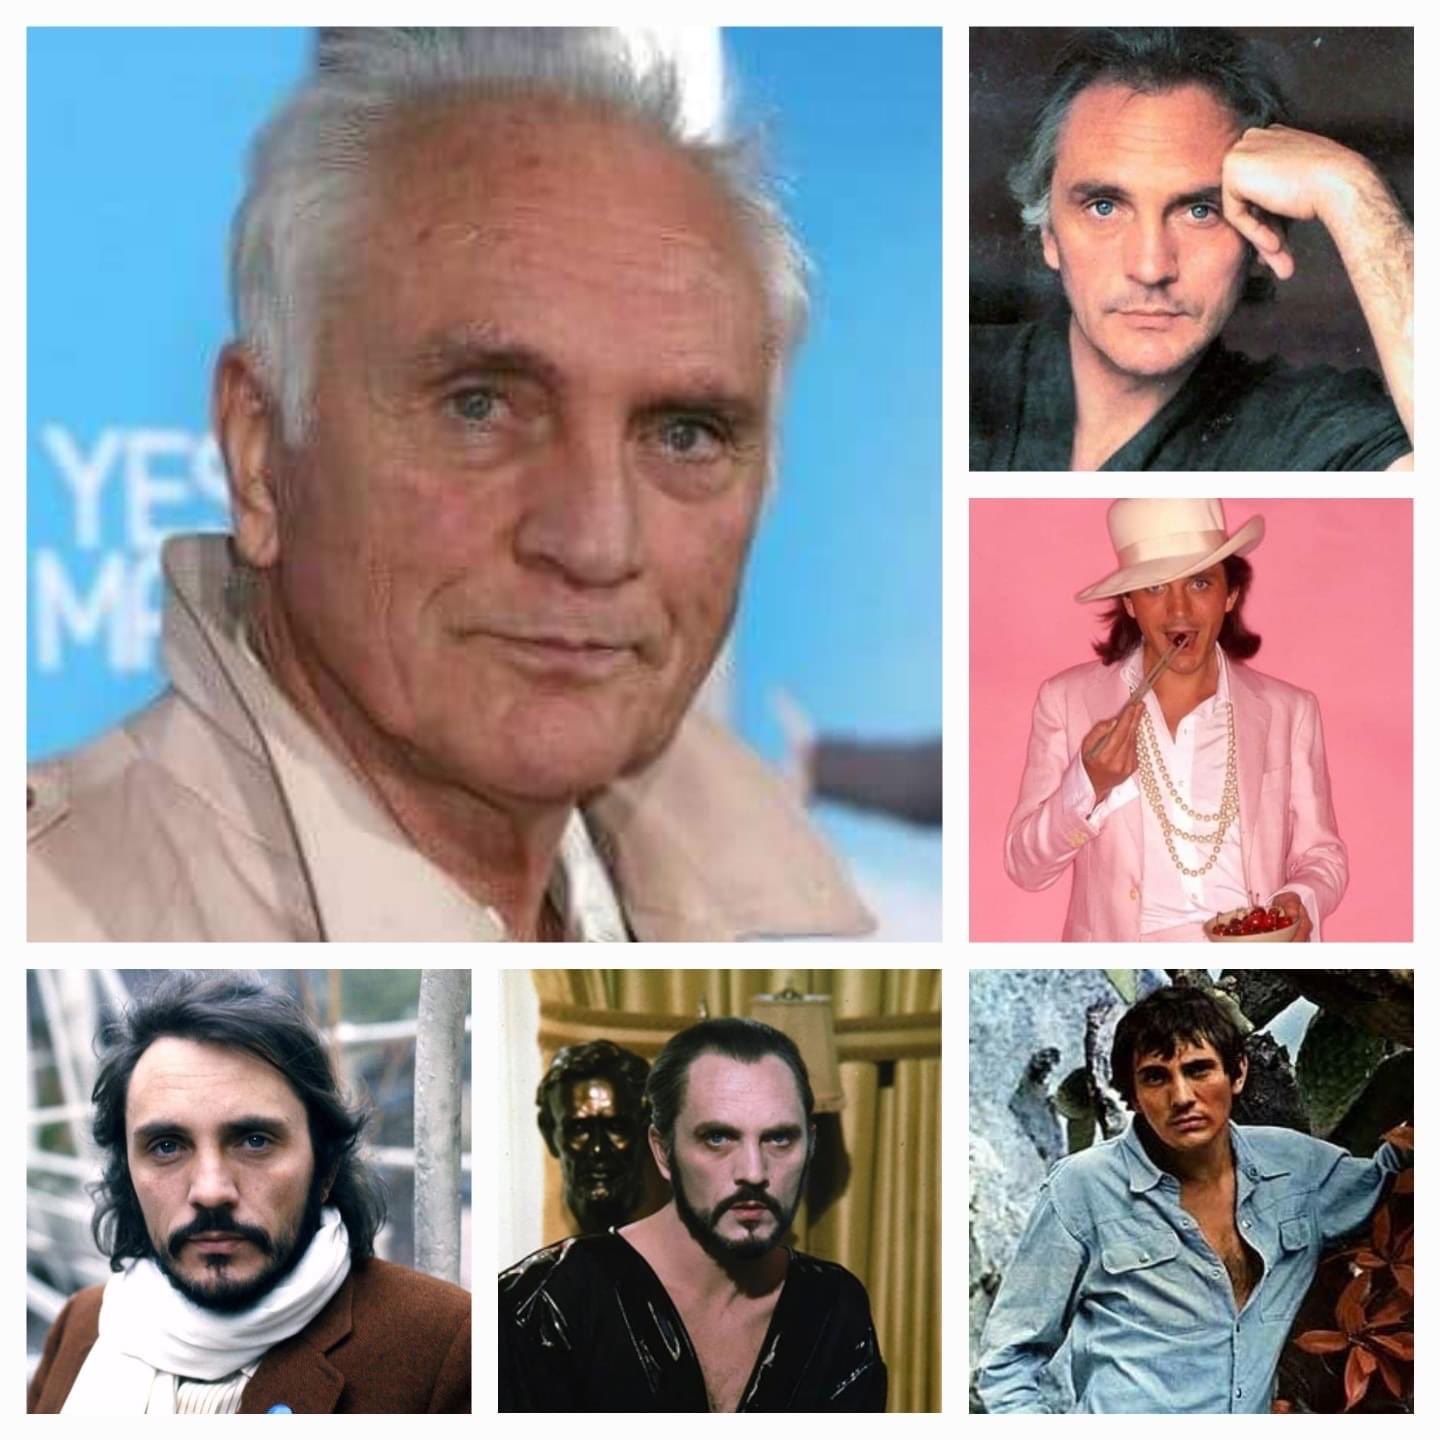 Happy 84th birthday Terence Stamp! The British icon and legend. 